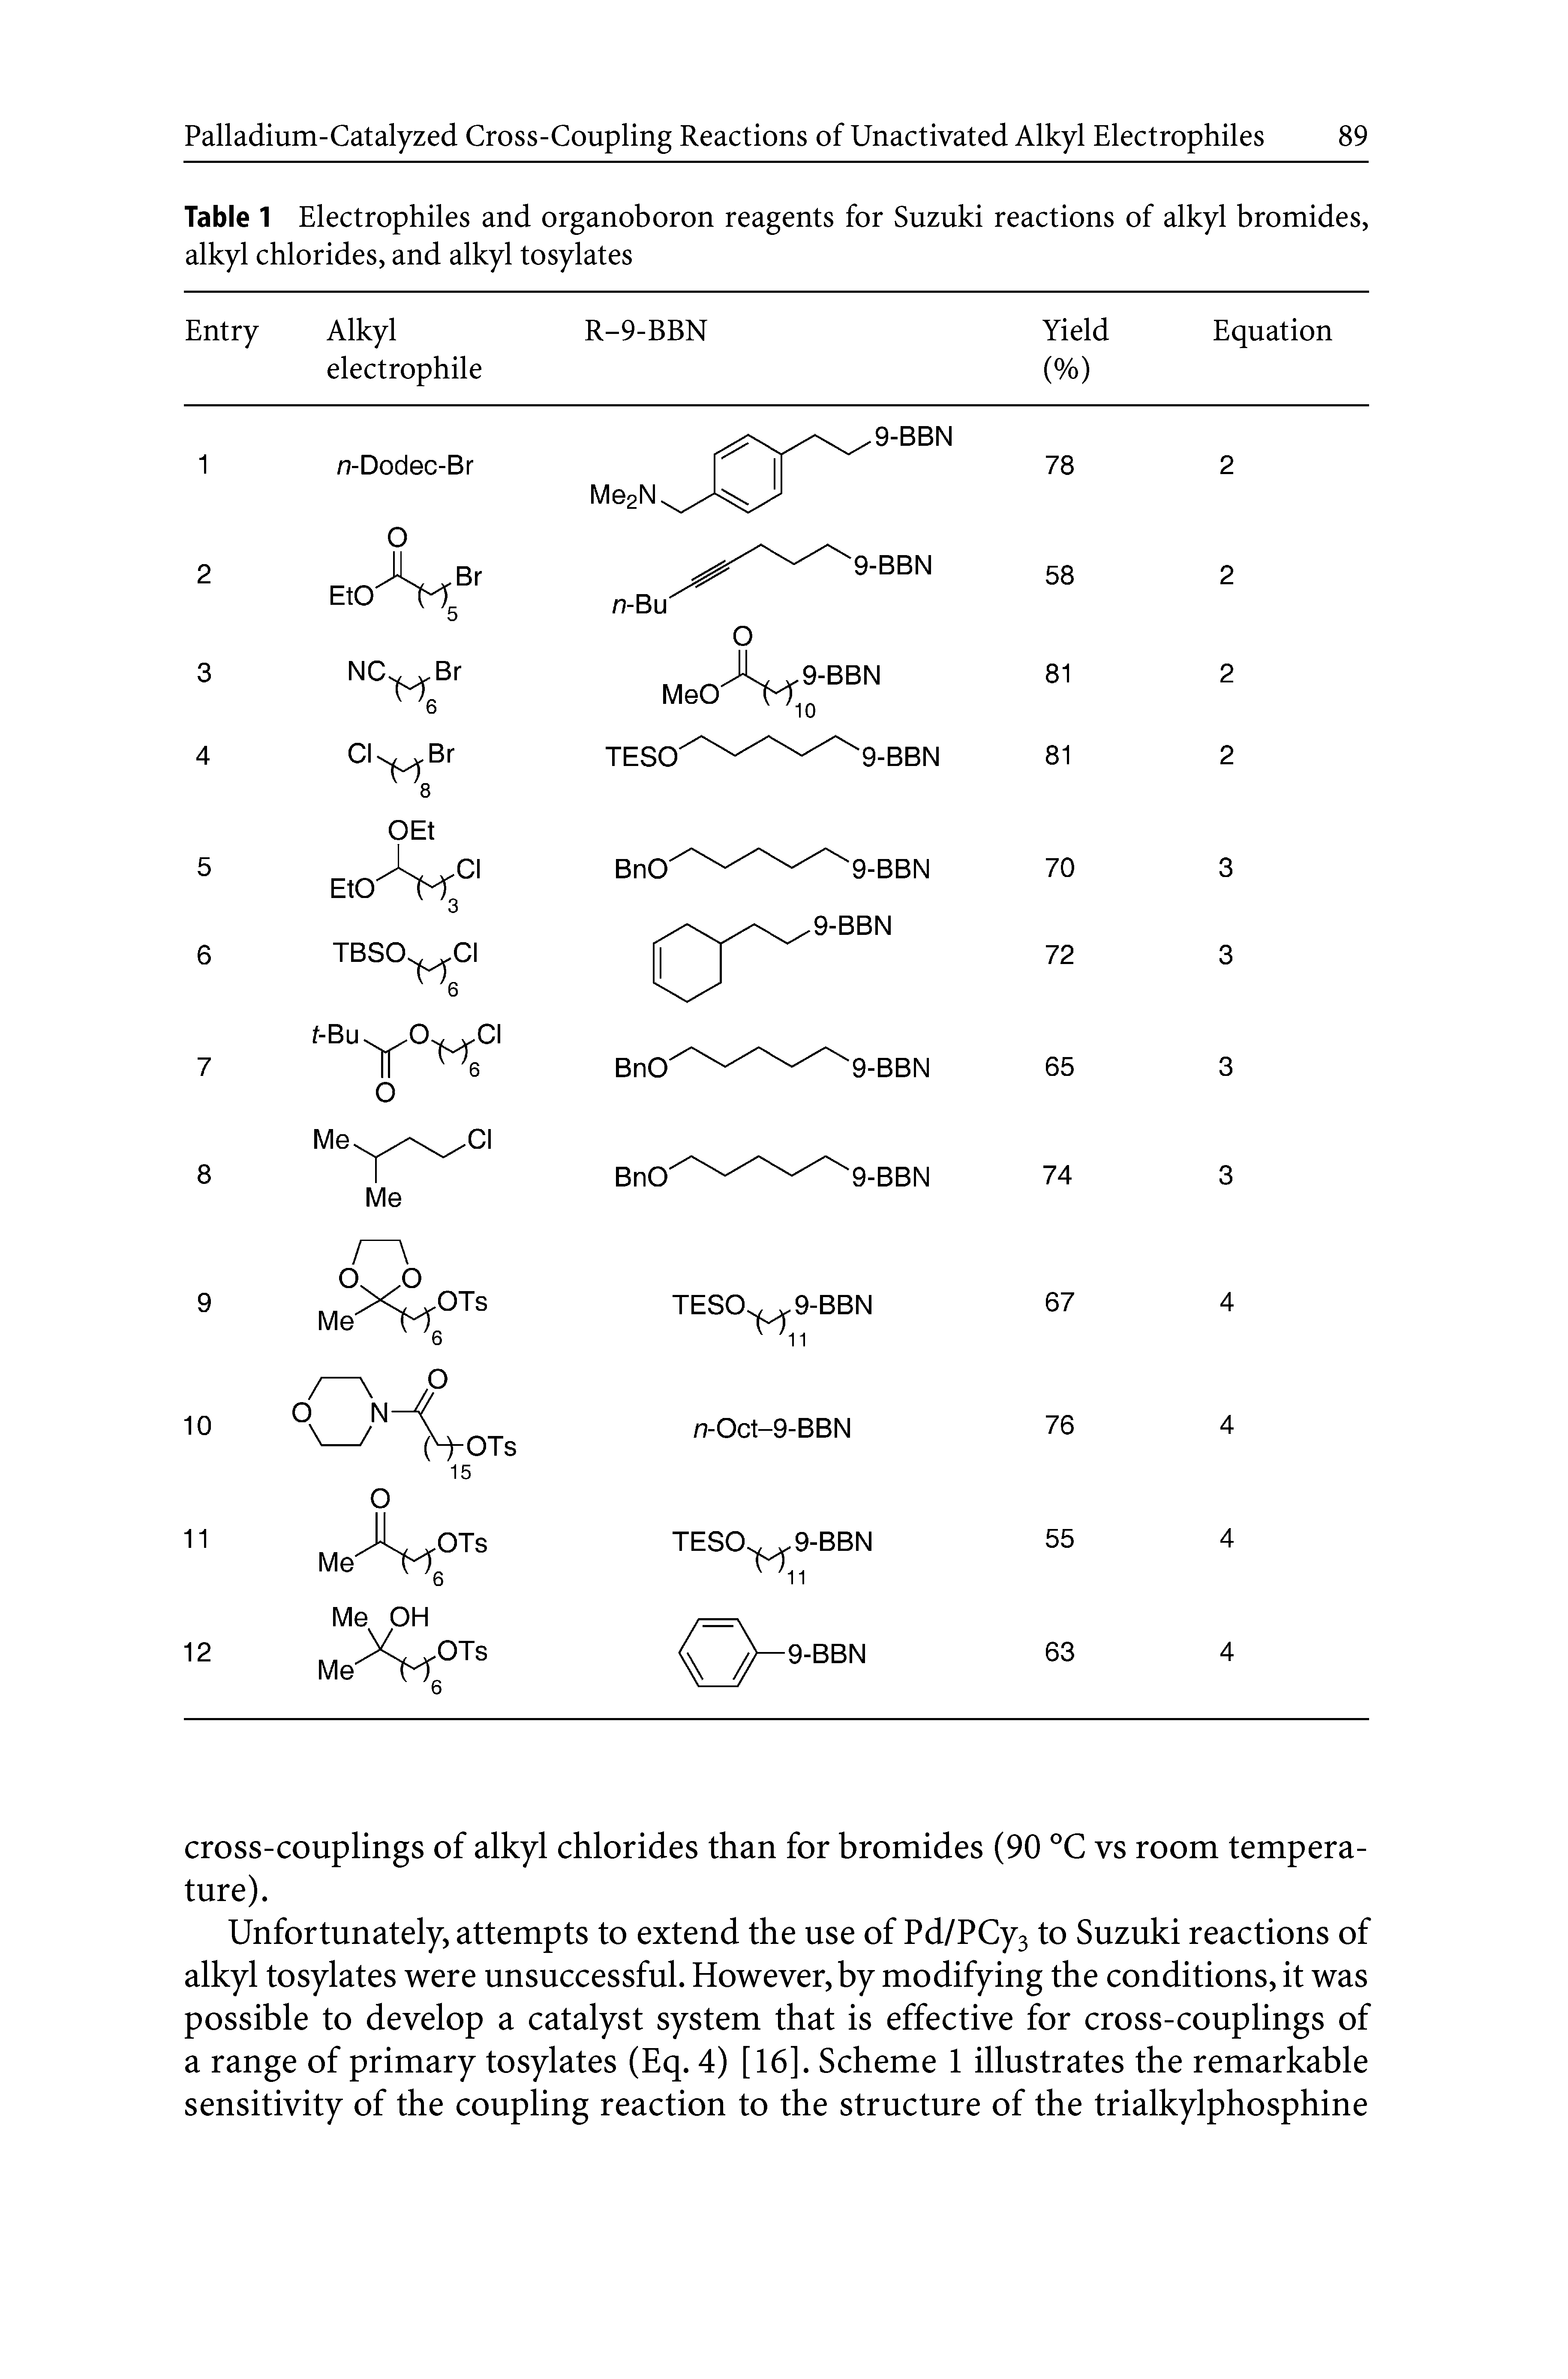 Table 1 Electrophiles and organoboron reagents for Suzuki reactions of alkyl bromides, alkyl chlorides, and alkyl tosylates...